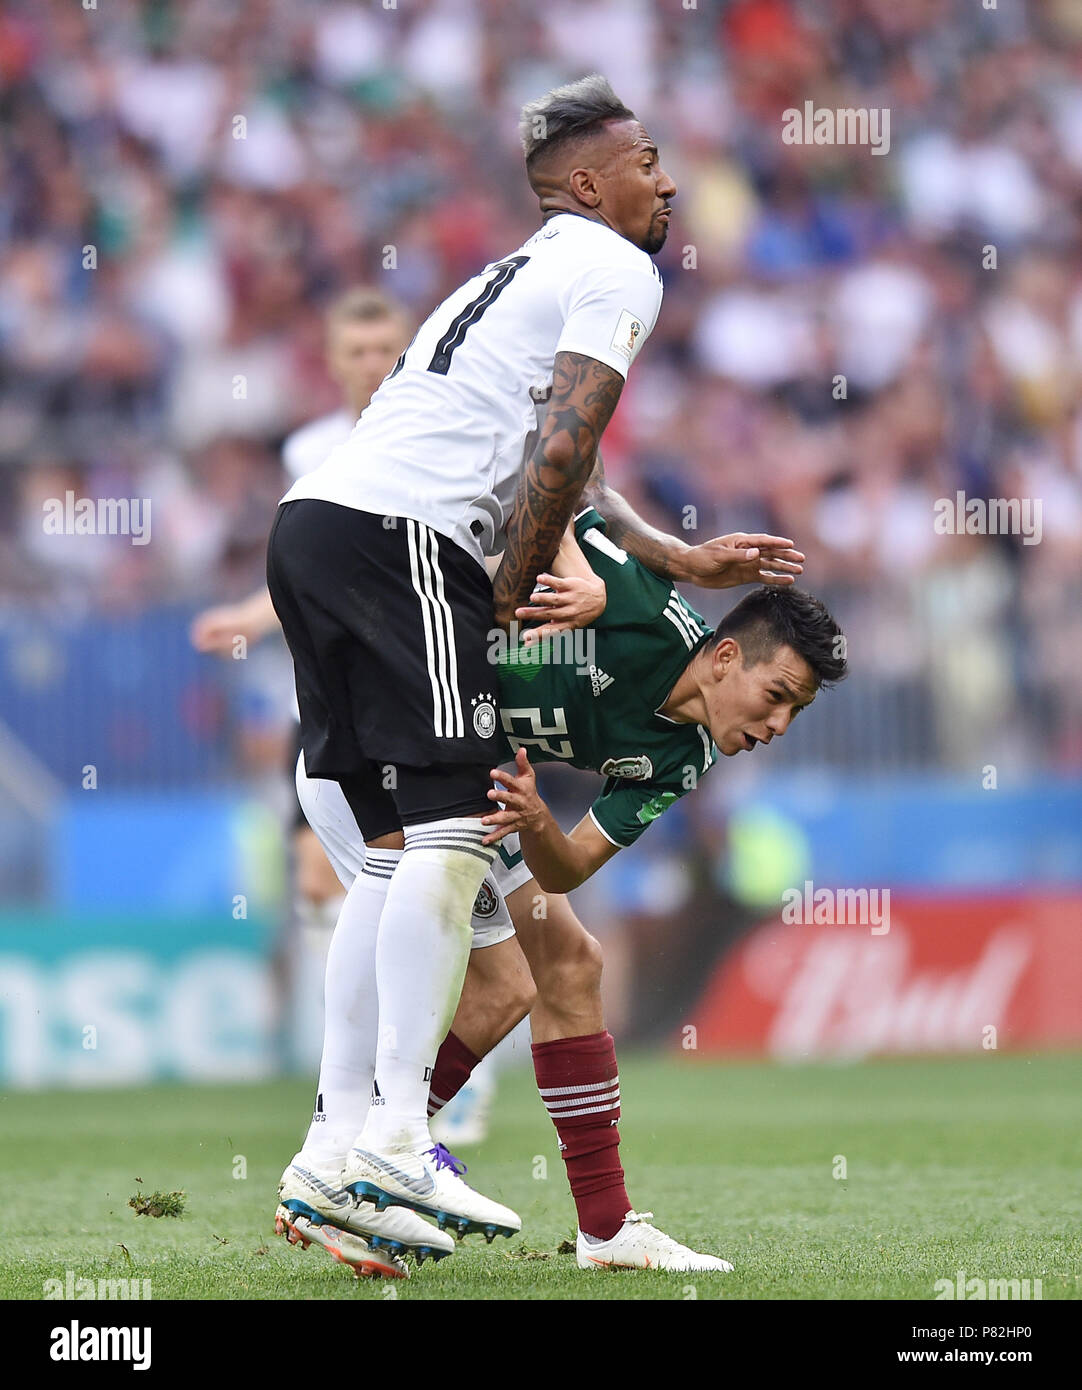 MOSCOW, RUSSIA - JUNE 17: Jerome Boateng of Germany competes with Hirving Lozano of Mexico during the 2018 FIFA World Cup Russia group F match between Germany and Mexico at Luzhniki Stadium on June 17, 2018 in Moscow, Russia. (Photo by Lukasz Laskowski/PressFocus/MB Media) Stock Photo